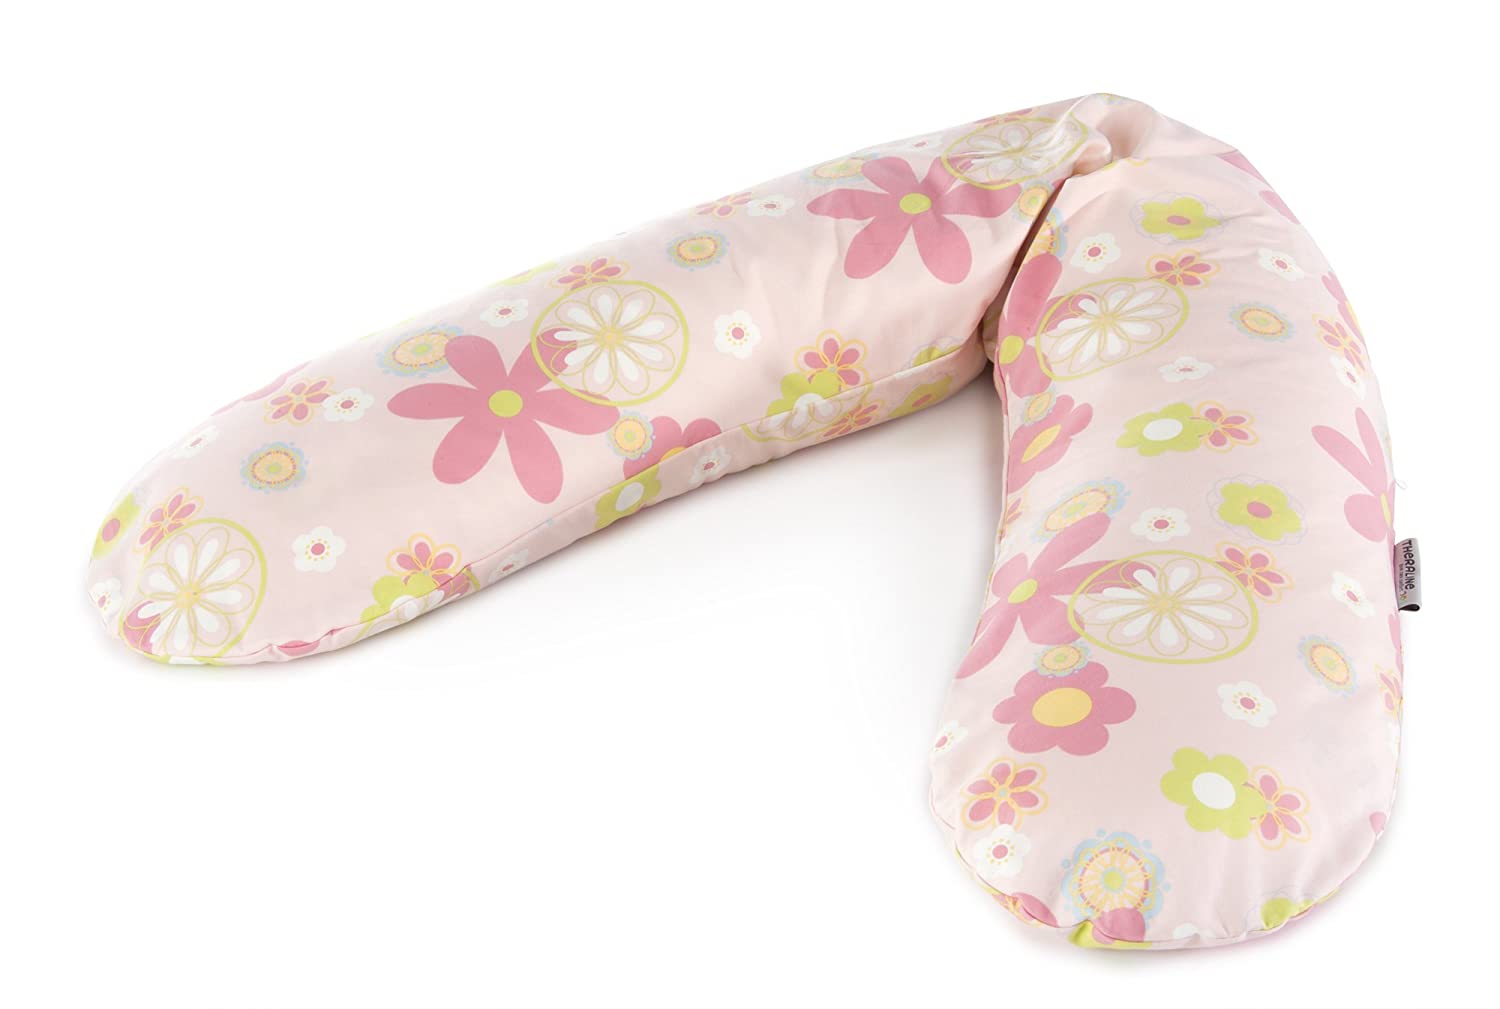 Replacement Cover For The Original Theraline Pregnancy And Nursing Pillow, 100% Cotton. Pattern Flower tendril